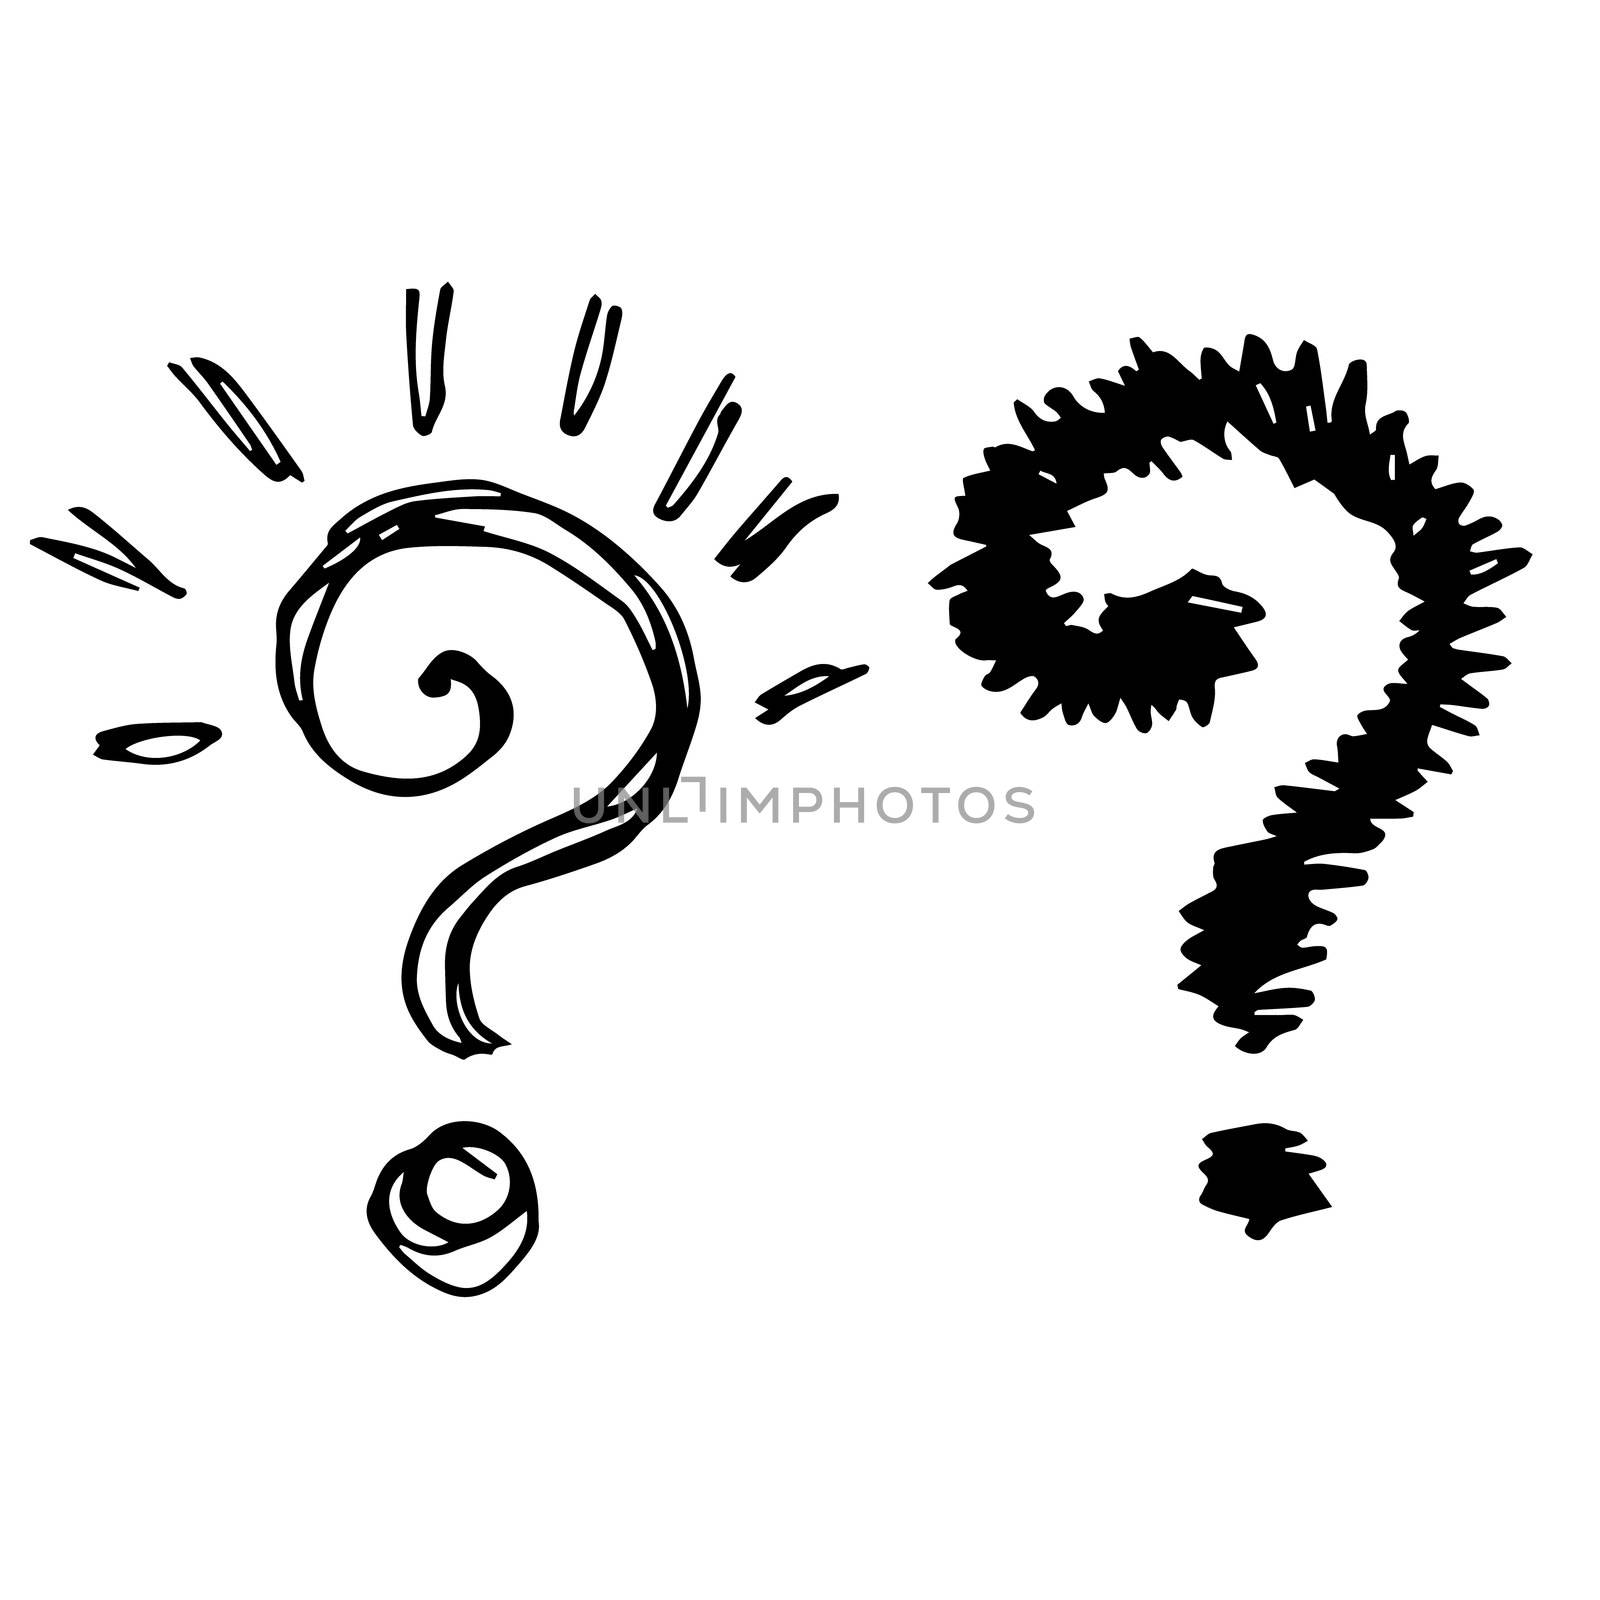 illustration of question marks by simpleBE